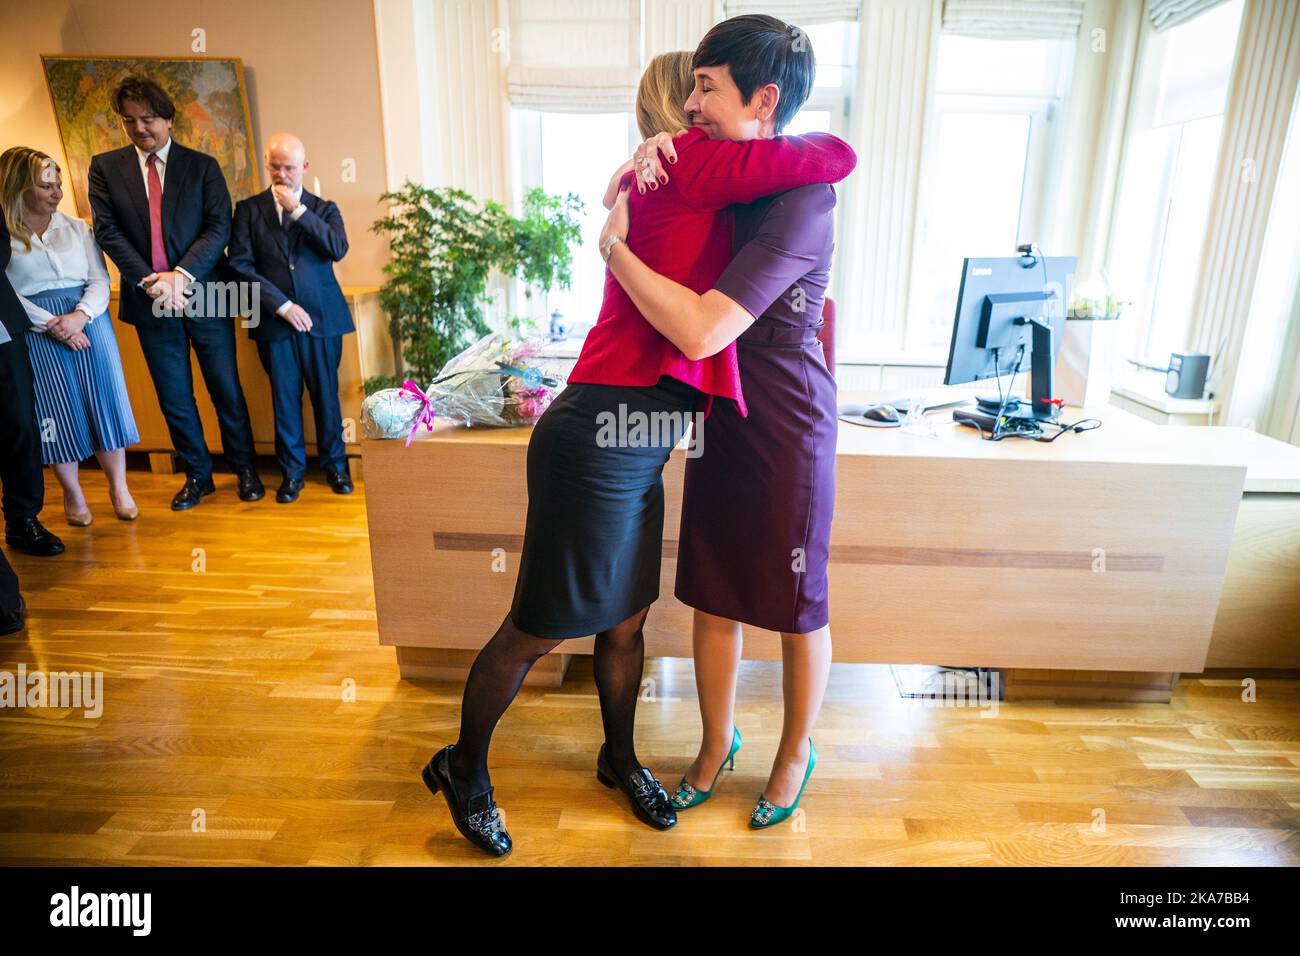 Oslo 20211014. Upcoming Foreign Minister Anniken Huitfeldt (Labor Party) and outgoing Foreign Minister Ine Marie Eriksen Soreide (H) during the key handover at the Ministry of Foreign Affairs in Oslo on Thursday. Photo: HÃ¥kon Mosvold Larsen / NTB  Stock Photo